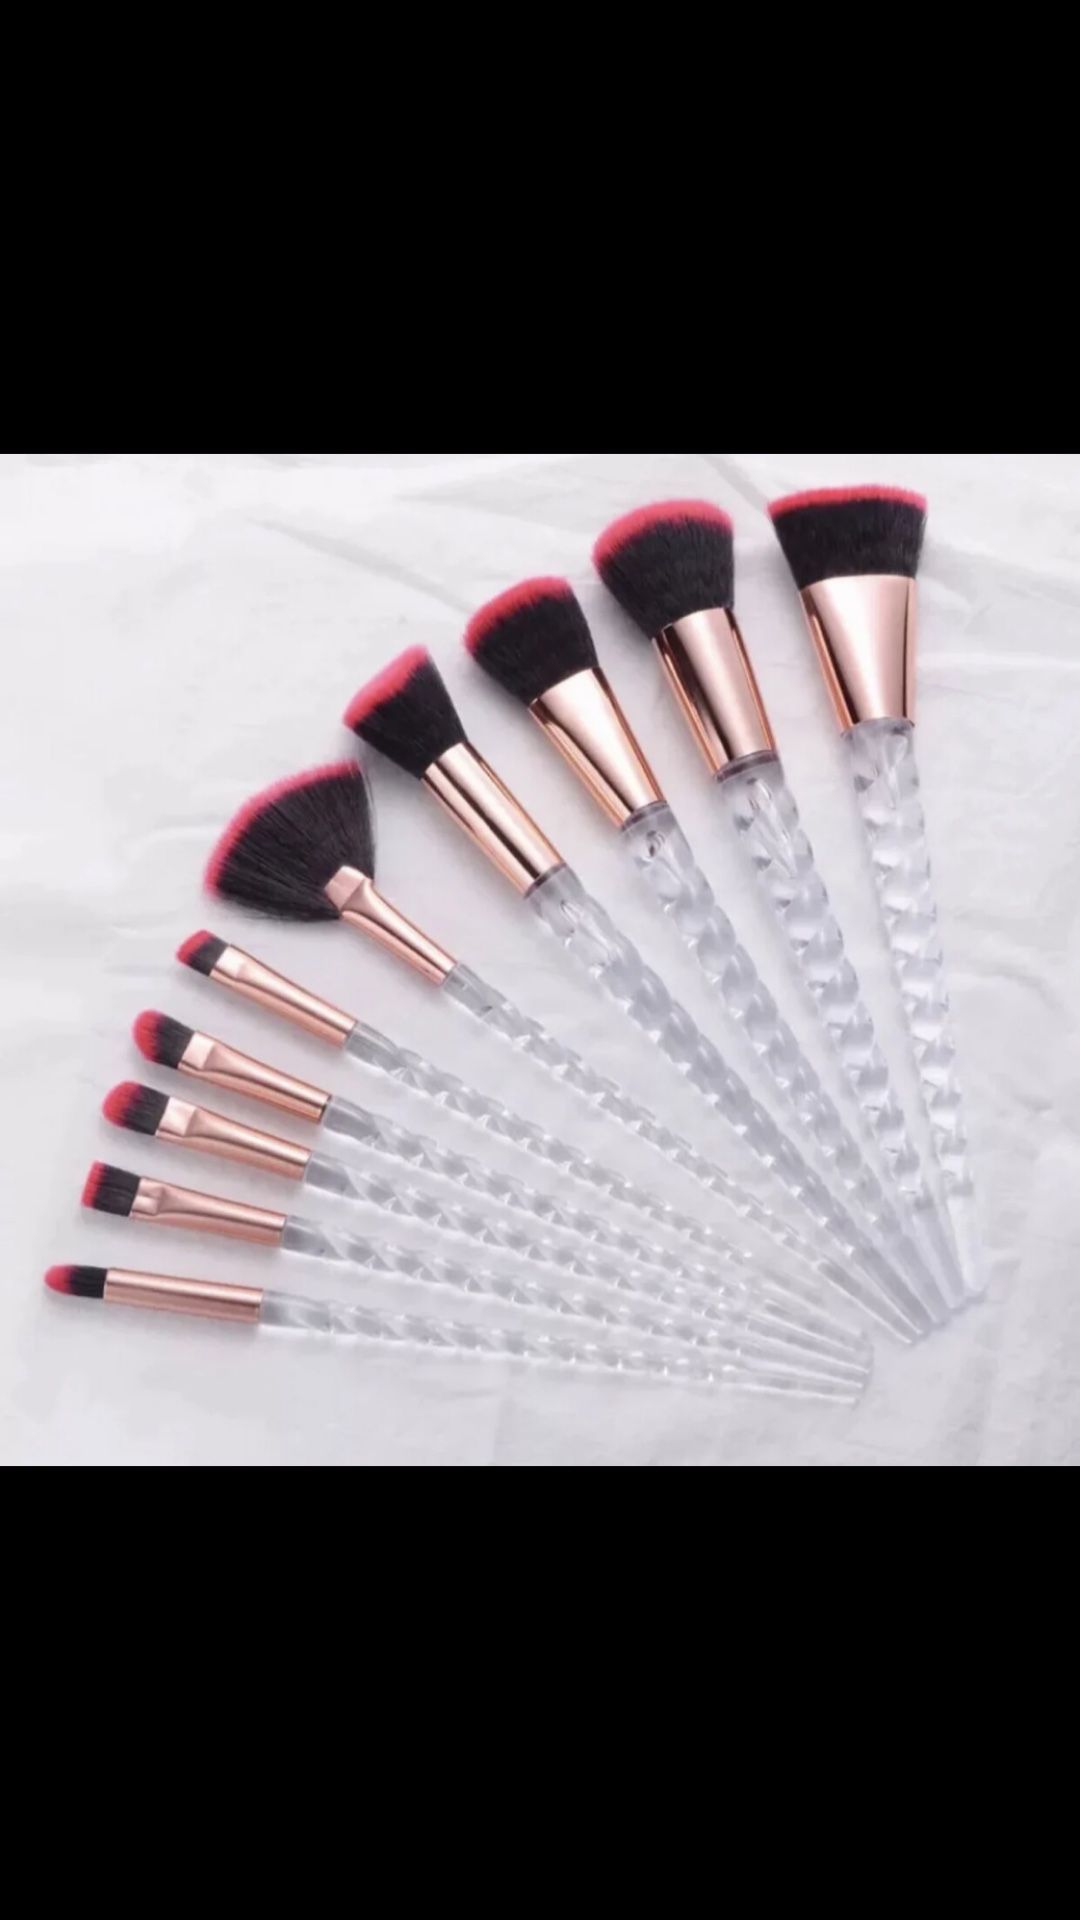 10 Piece Set of New Make Up Brushes 